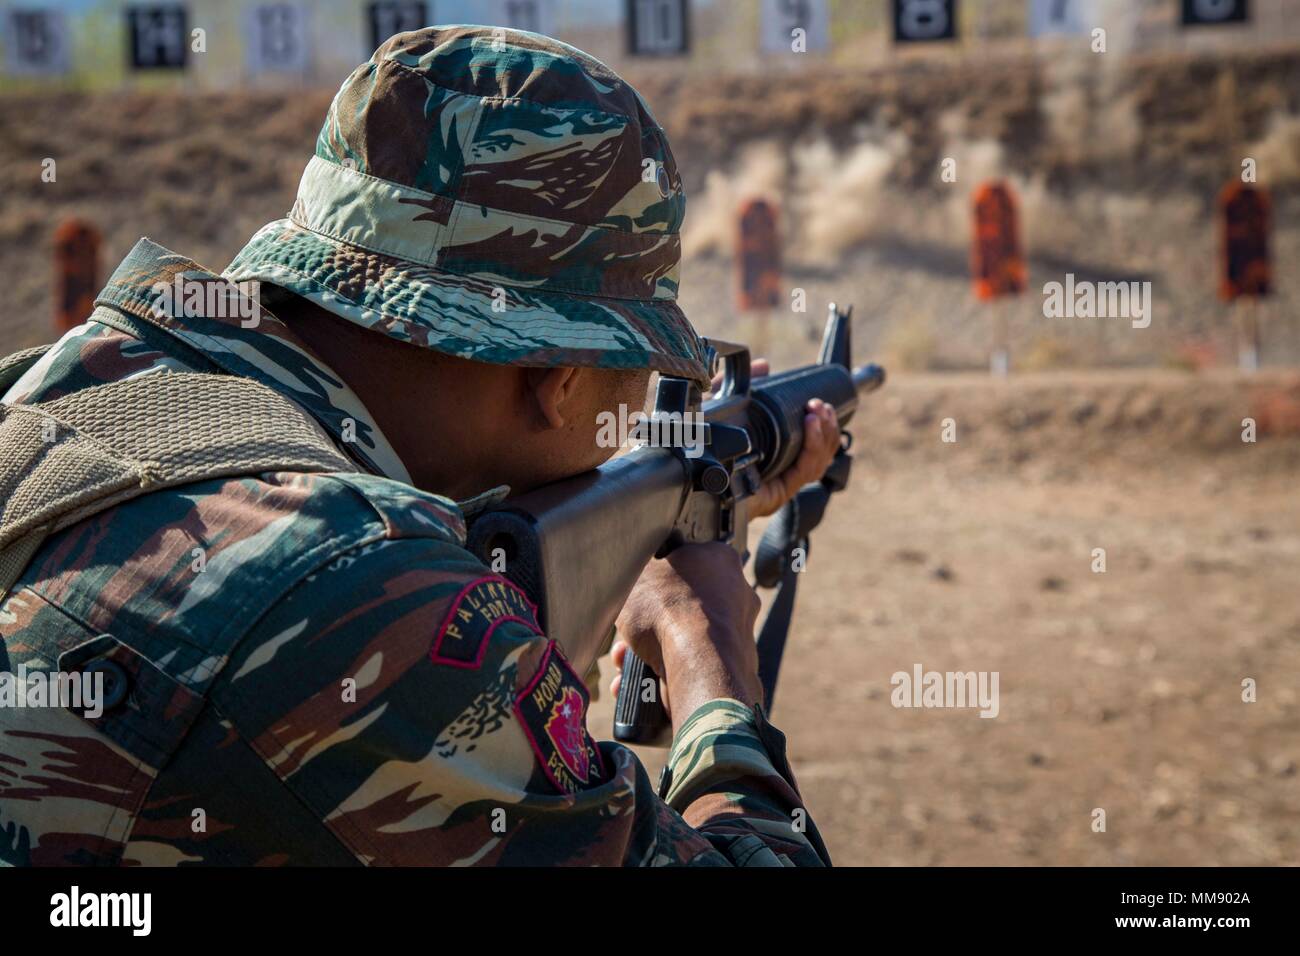 A member of the Falantil Forca de Defensa Timor Leste shoots at a target at a live fire range during Exercise Crocodilo as a part of Exercise Koa Moana 17 in Metinaro, Timor Leste, Sept. 11, 2017. Koa Moana 17 is designed to improve interoperability with our partners, enhance military-to-military relations, and expose the Marine Corps forces to different types of terrain for familiarity in the event of a natural disaster in the region.   (U.S. Marine Corps photo by MCIPAC Combat Camera Lance Cpl. Juan C. Bustos) Stock Photo